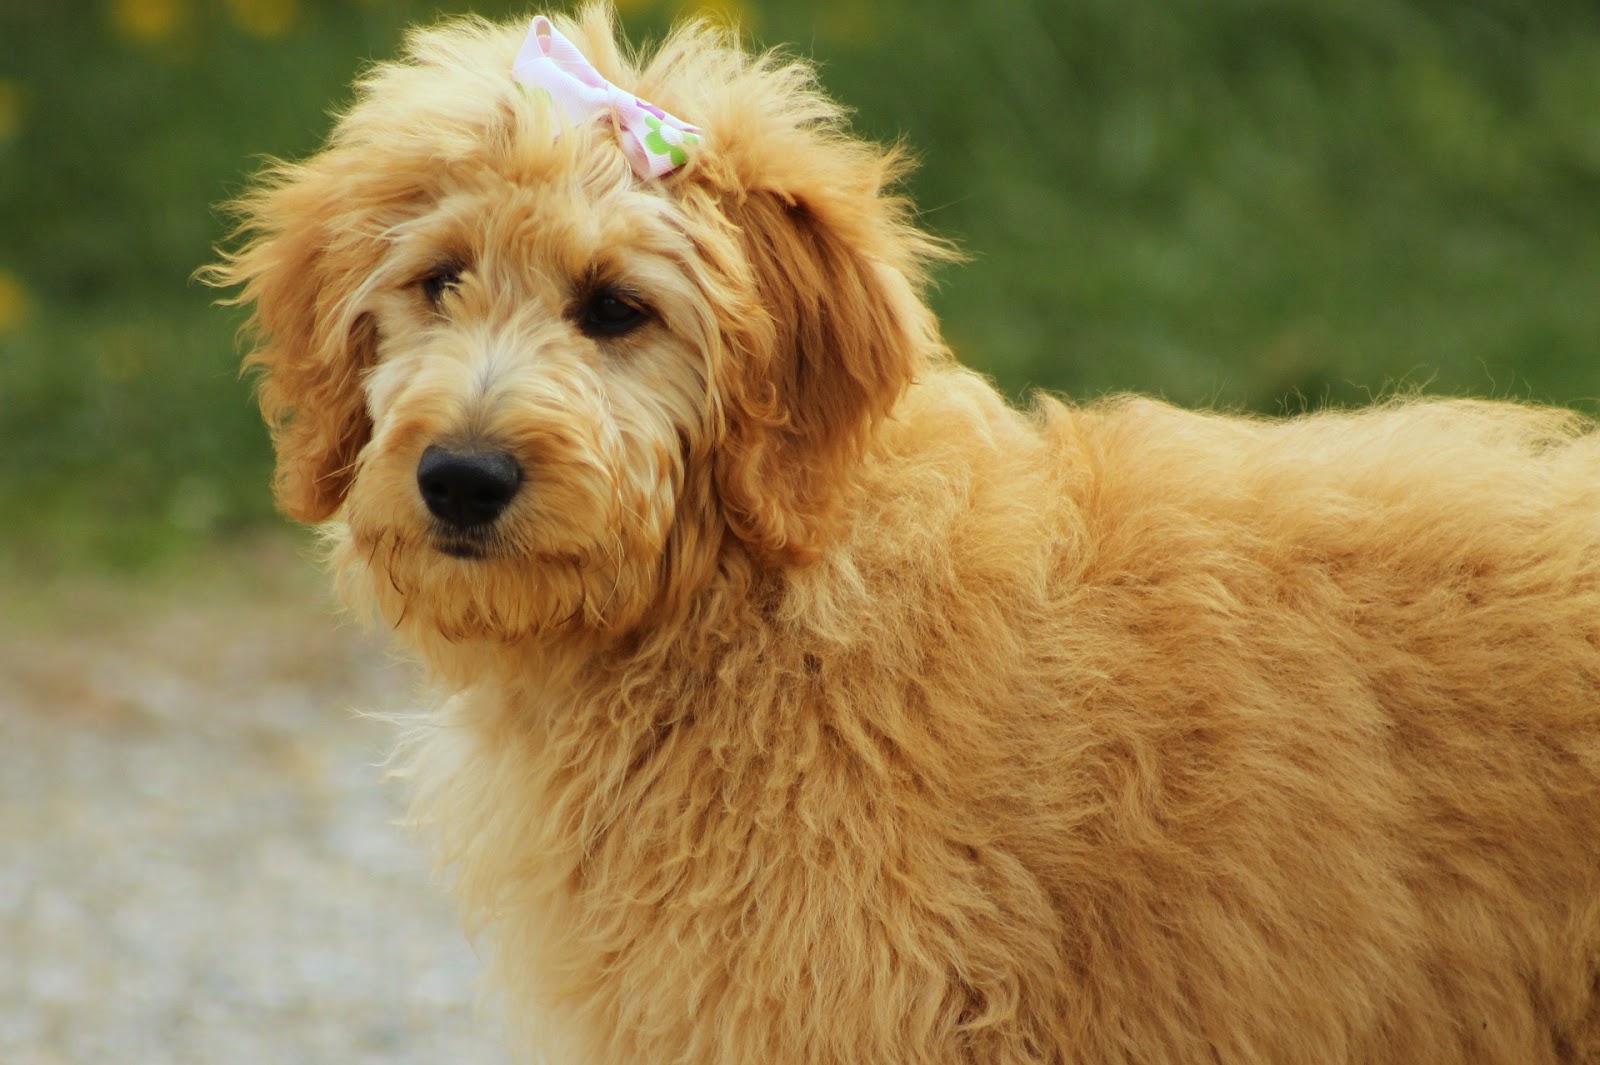 goldendoodle with bow tie in hair